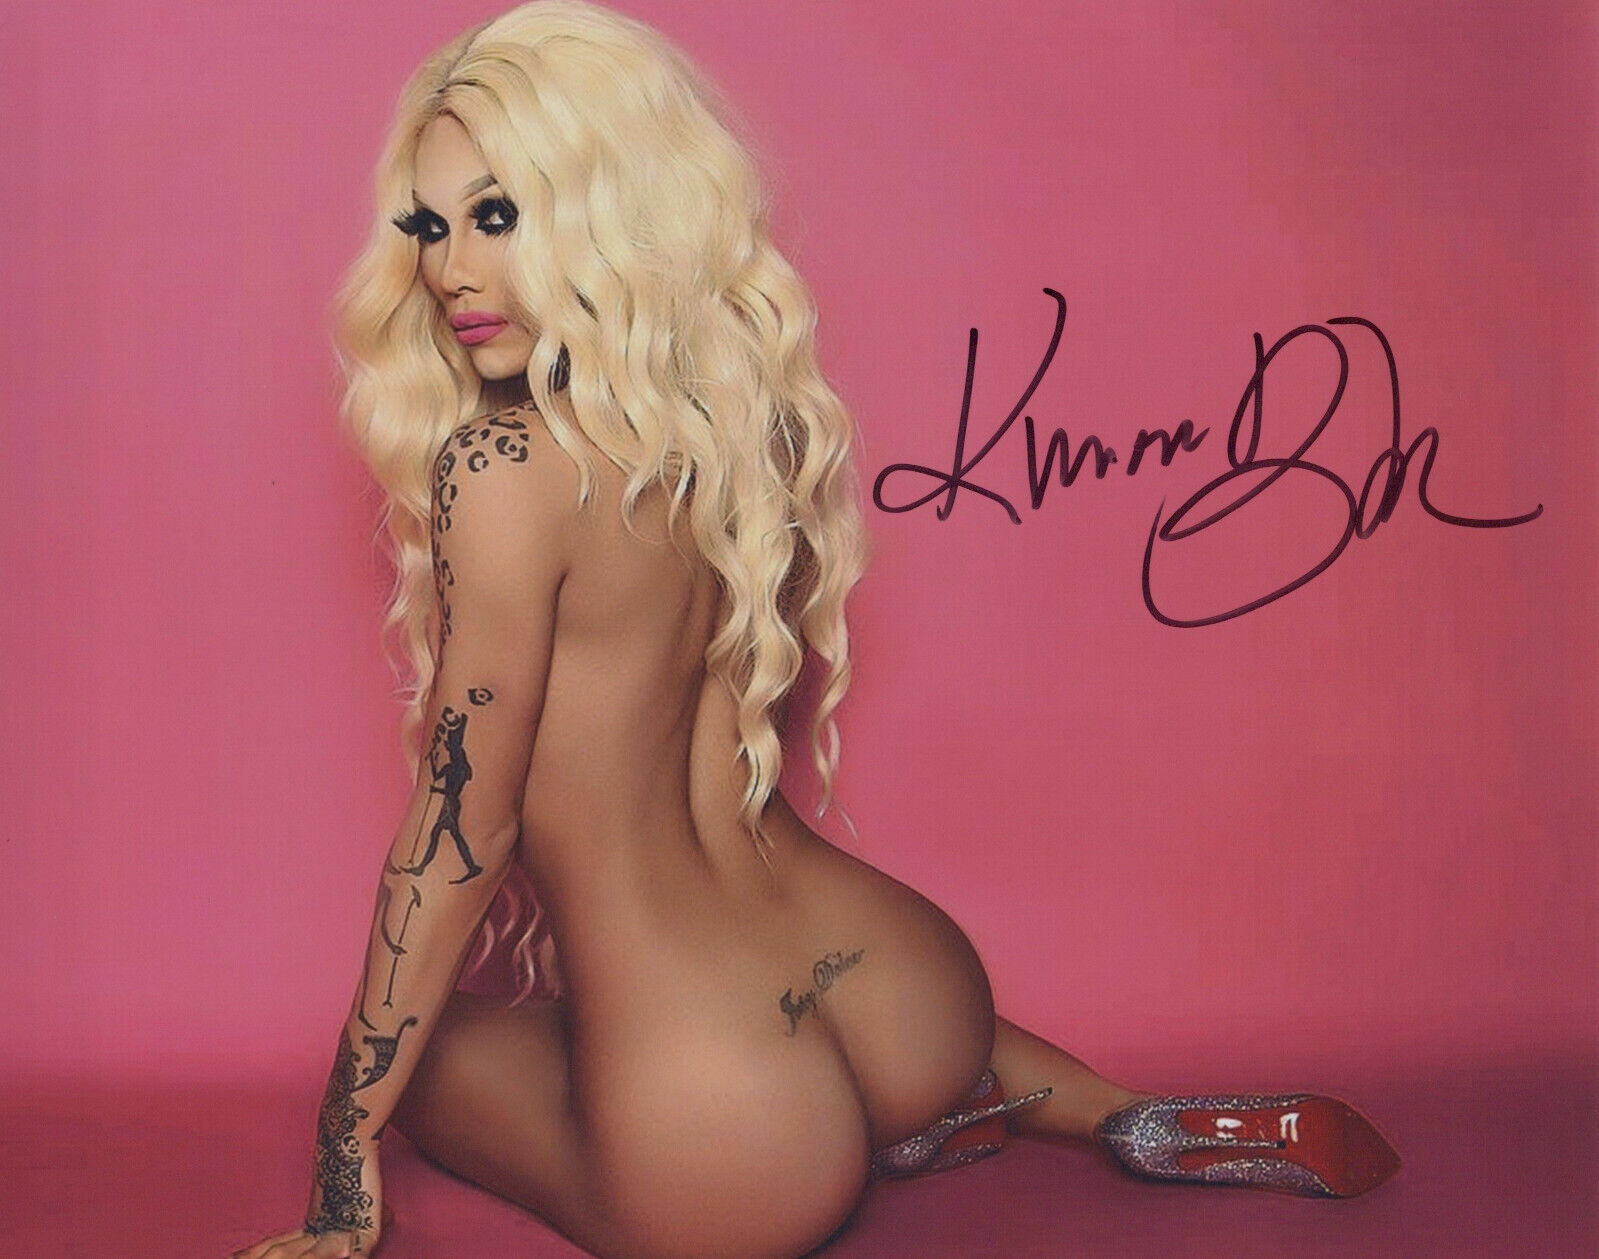 Kimora Blac (RuPaul's Drag Race) signed 8x10 Photo Poster painting In-person